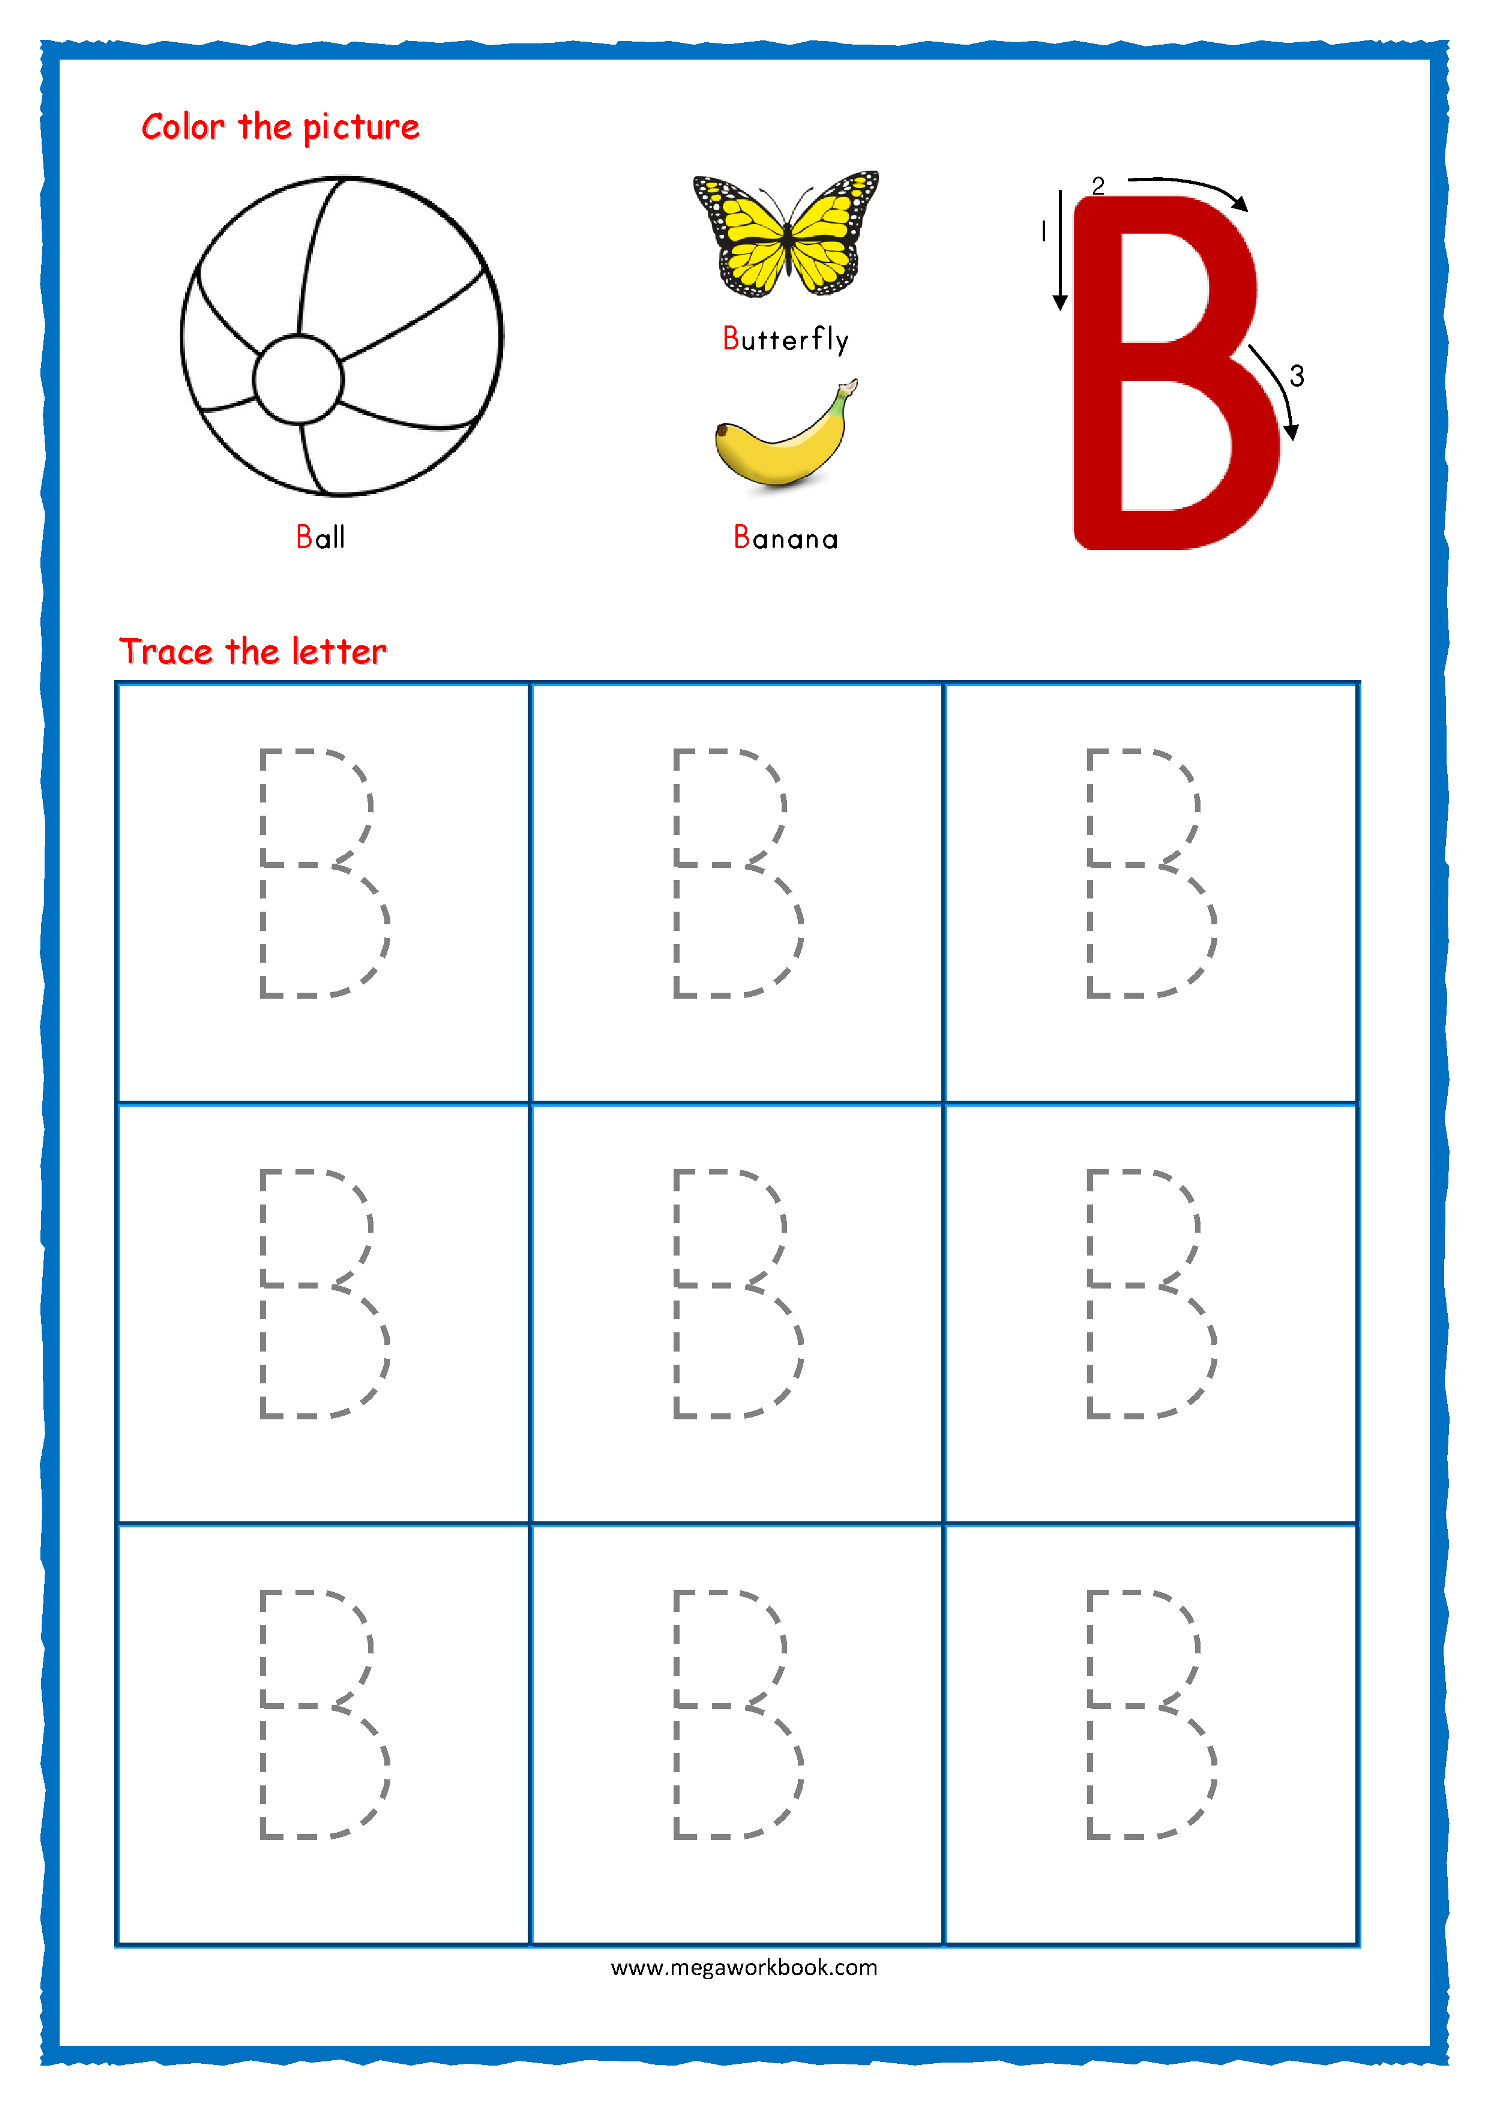 Tracing Letters - Alphabet Tracing - Capital Letters within Alphabet Tracing Activities For Preschoolers